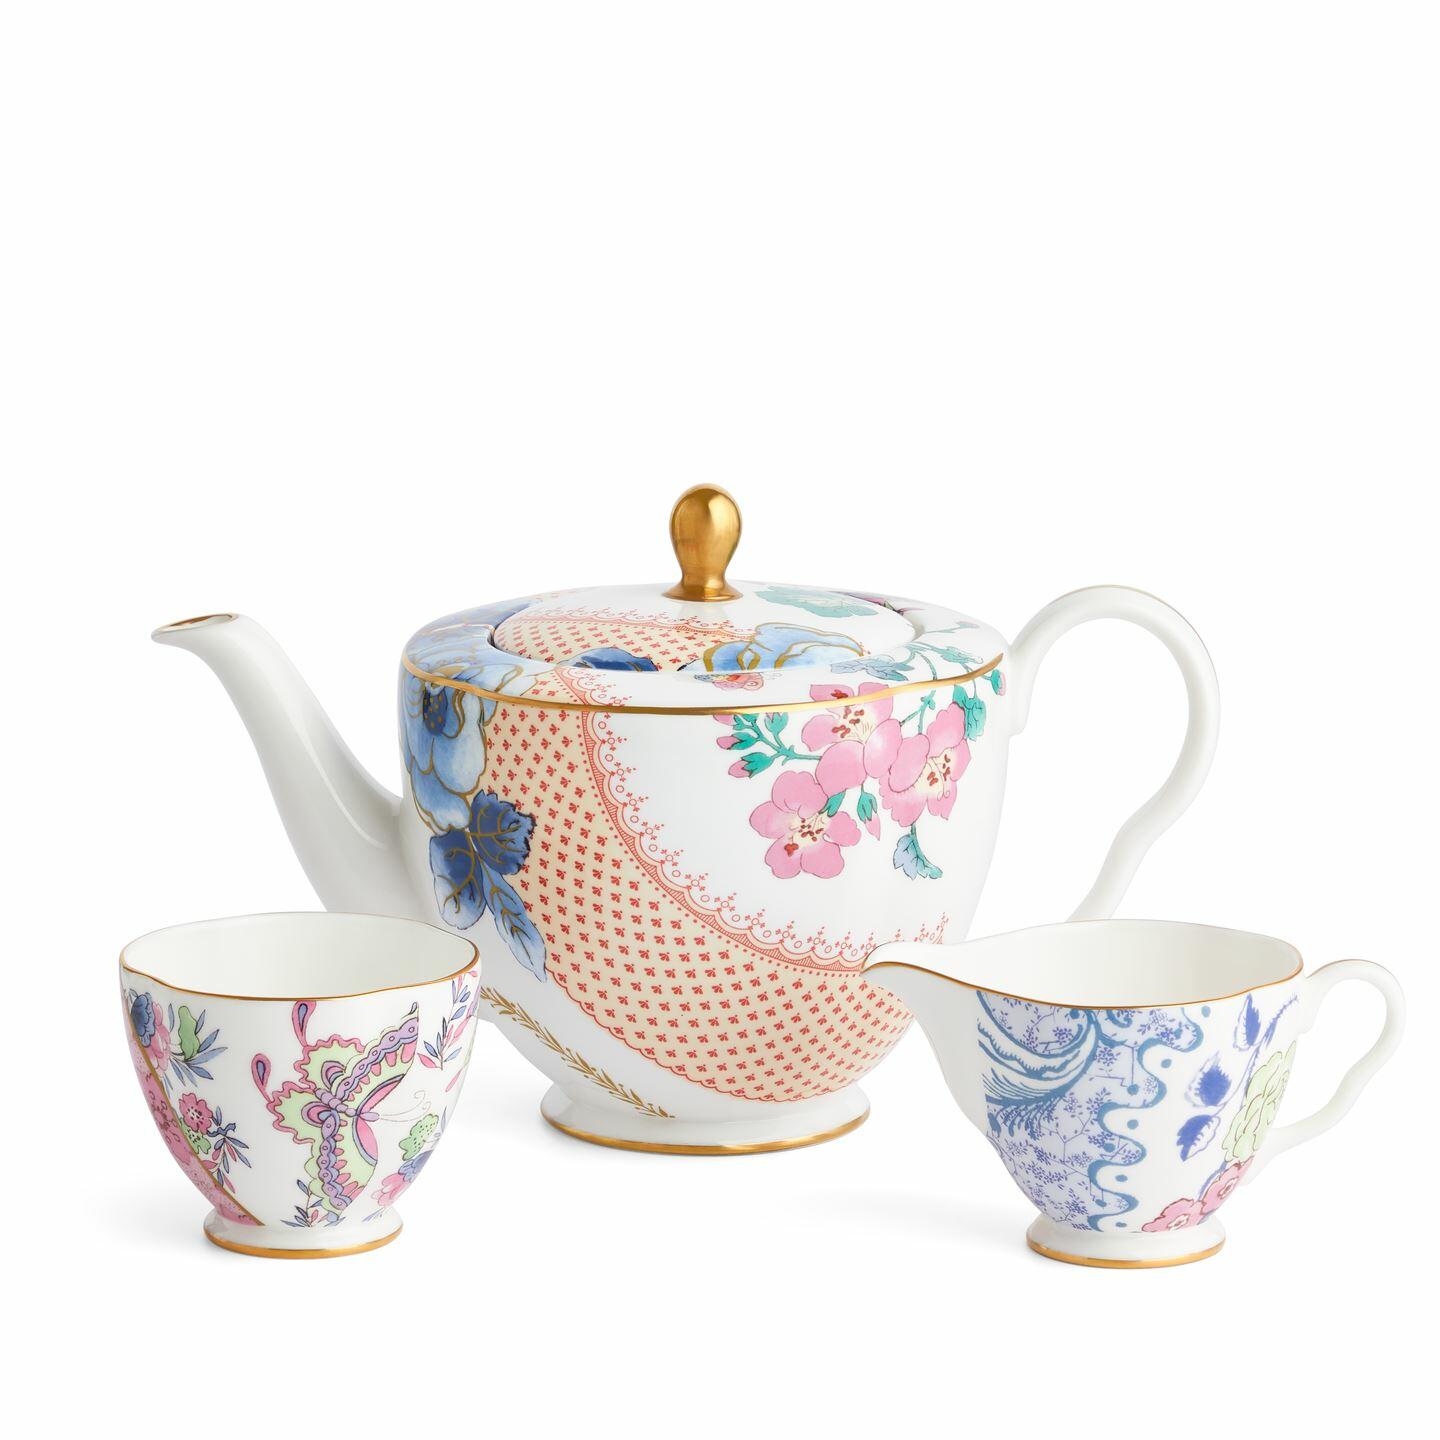 Wedgwood Butterfly Bloom 3 Piece Set: Teapot, Sugar Bowl and Cream Jug